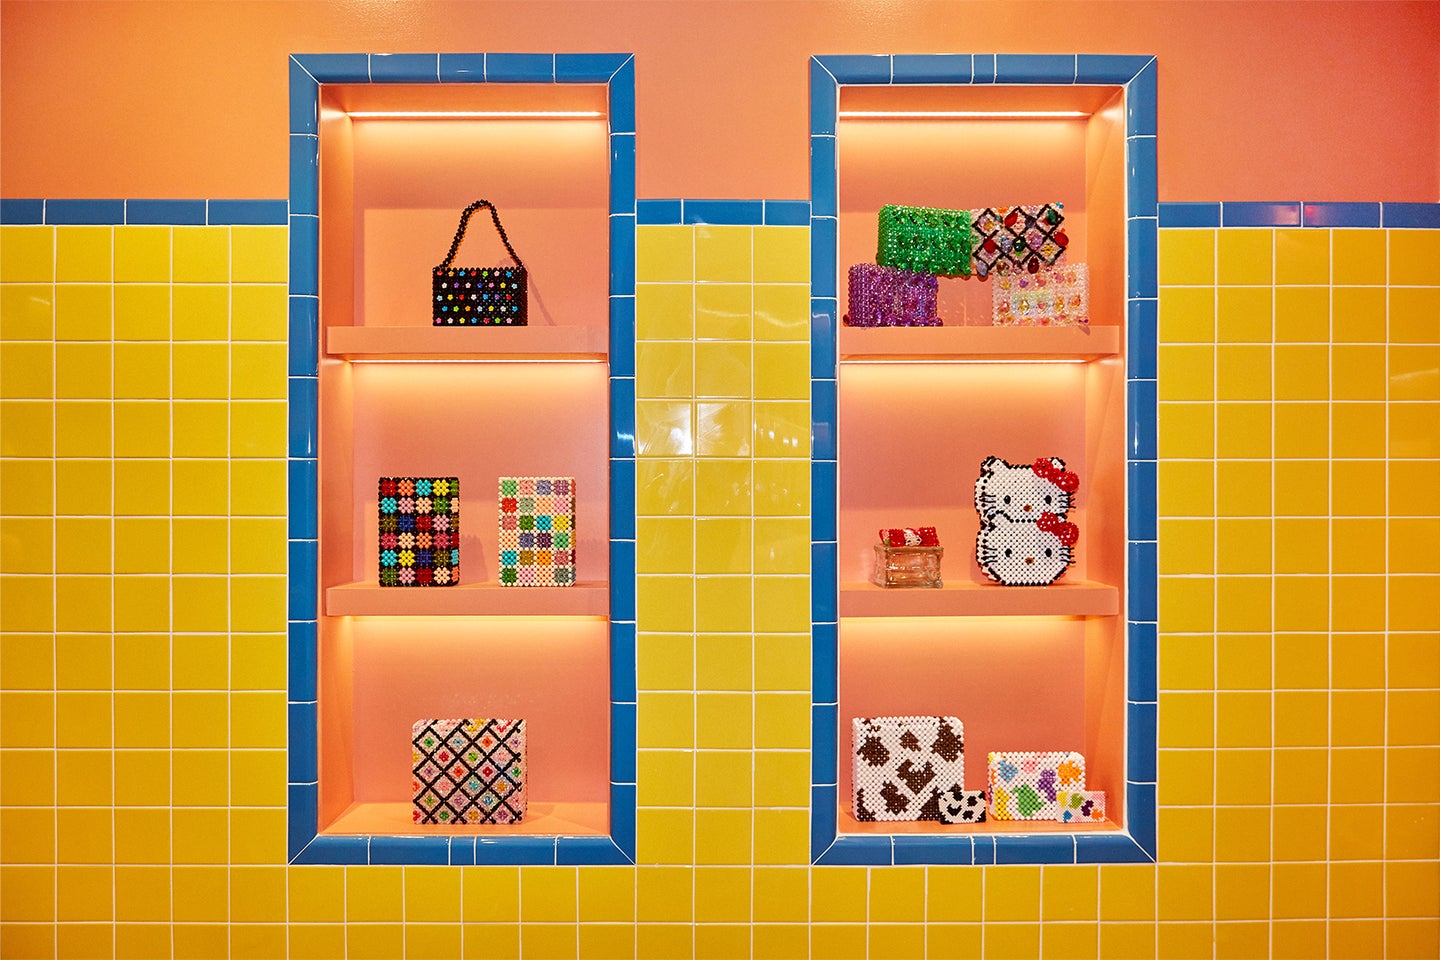 Design store interior with yellow tiles, orange shelves and walls and objects on shelves